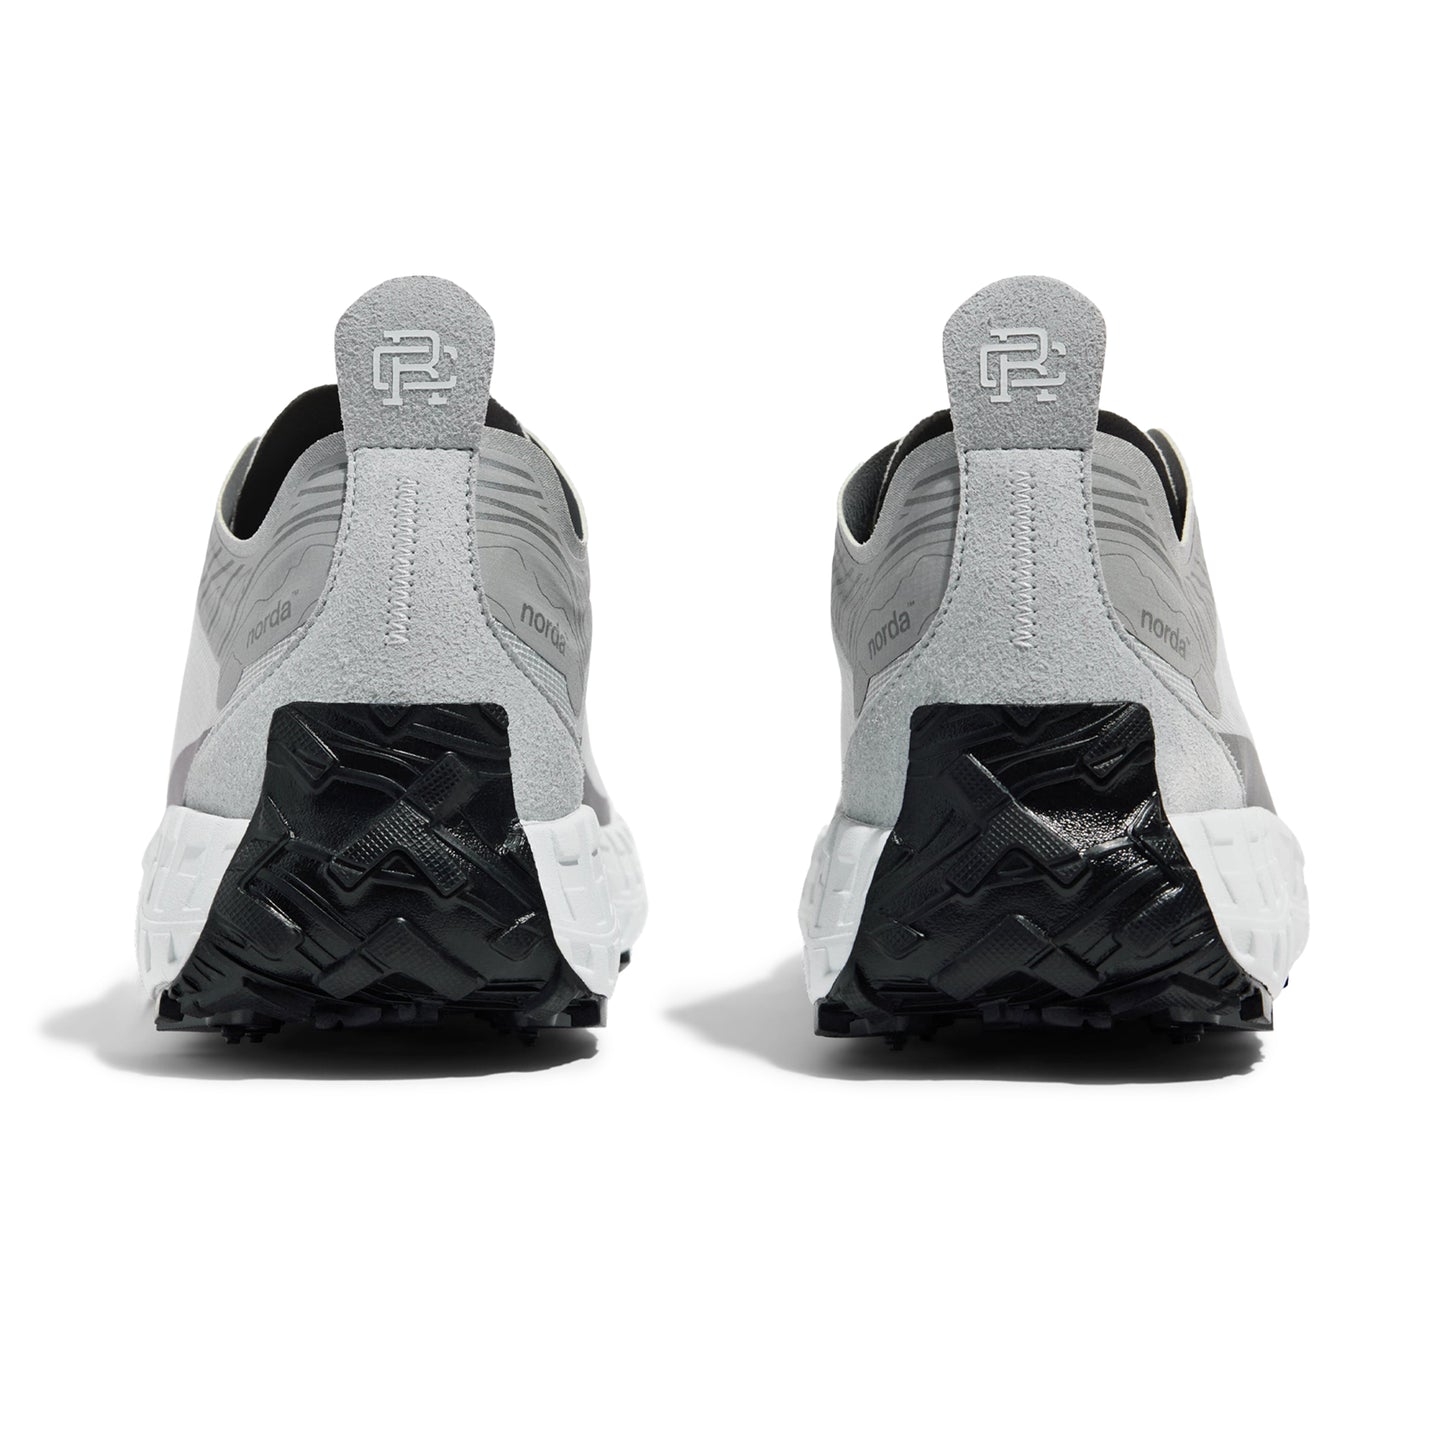 Norda x Reigning Champ 001 Trail Shoes